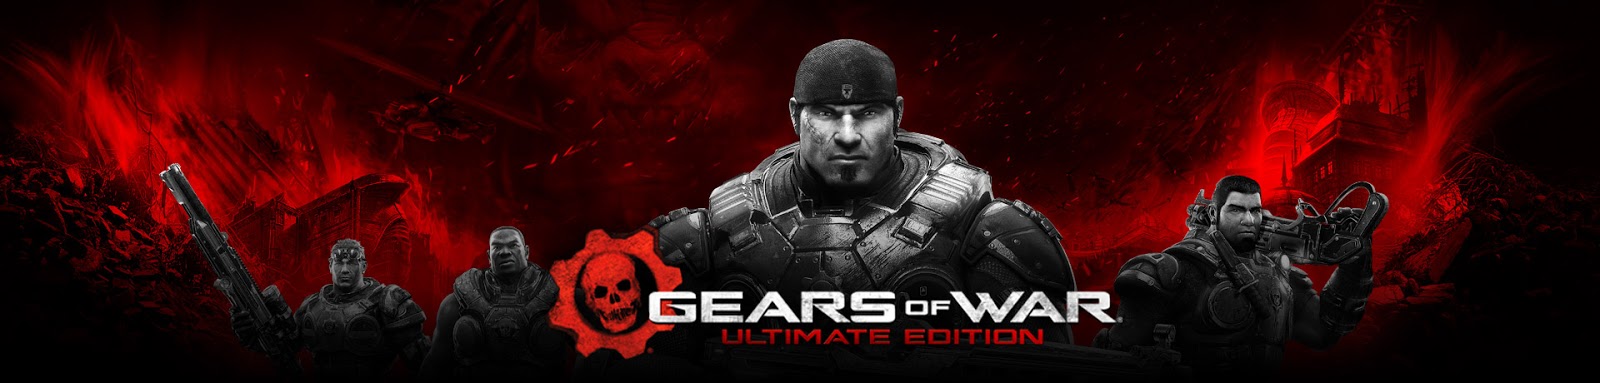 Gears of War brings back "Mad World" – Chalgyr's Game Room